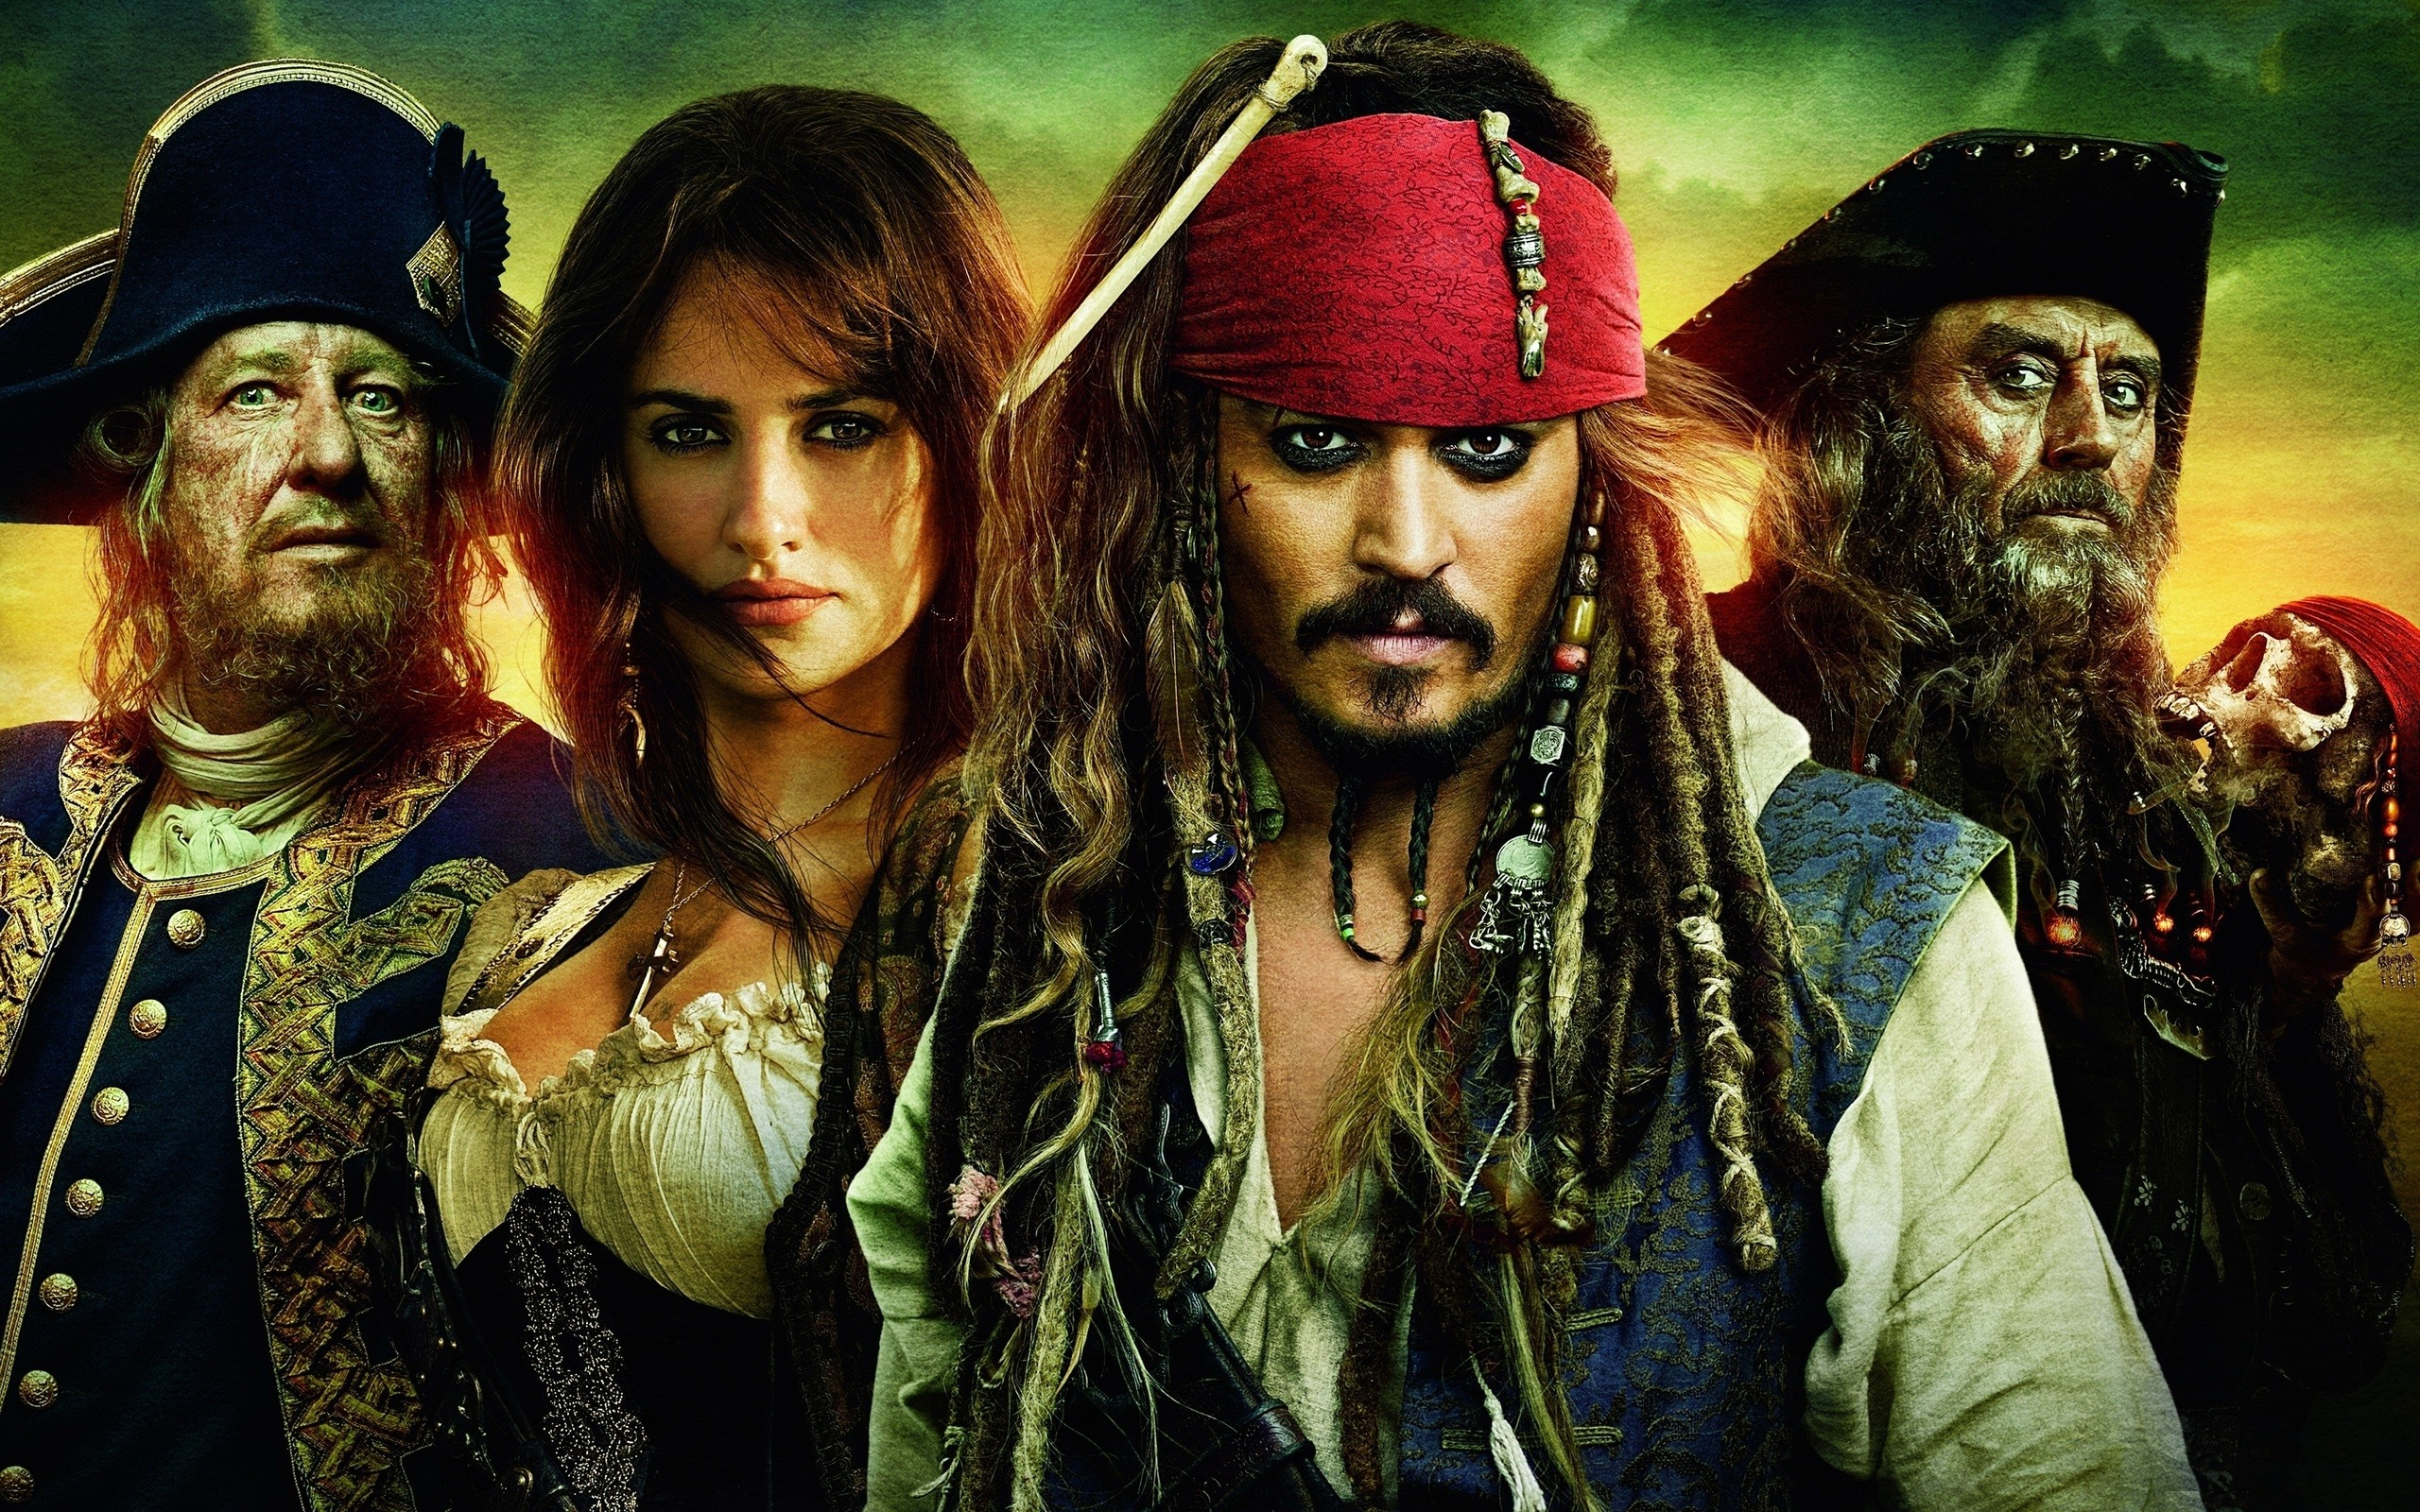 2560x1600 Pirates of the Caribbean: On Stranger Tides HD Wallpaper